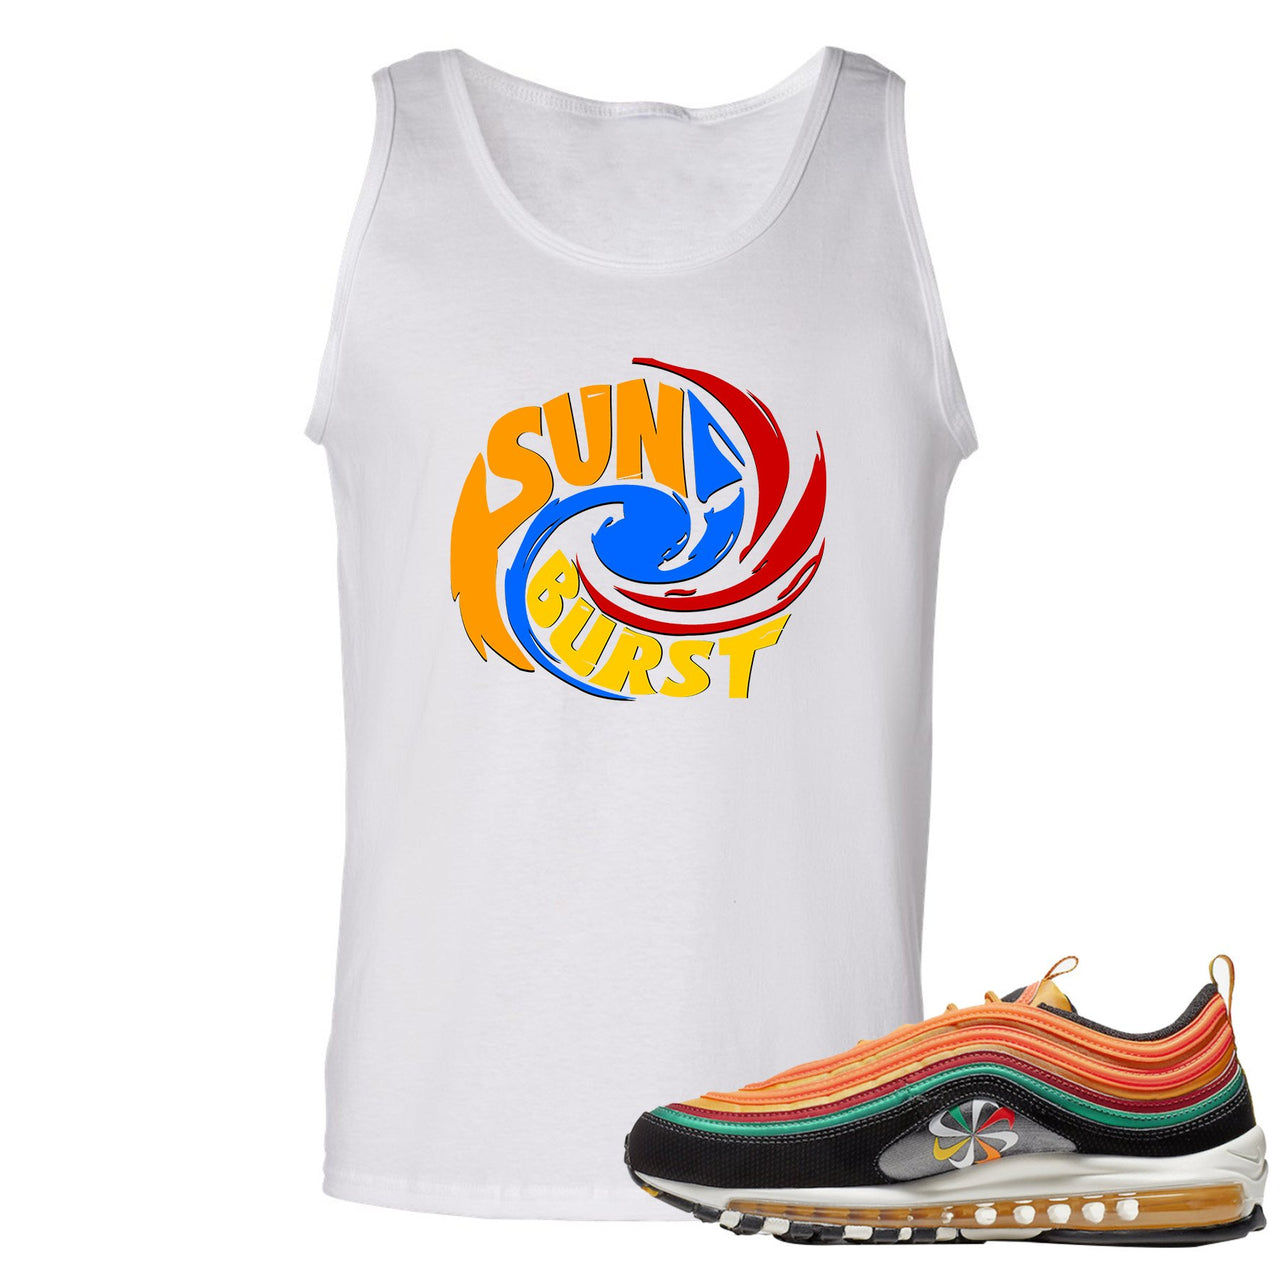 Printed on the front of the Air Max 97 Sunburst white sneaker matching tank top is the sunburst hurricane logo